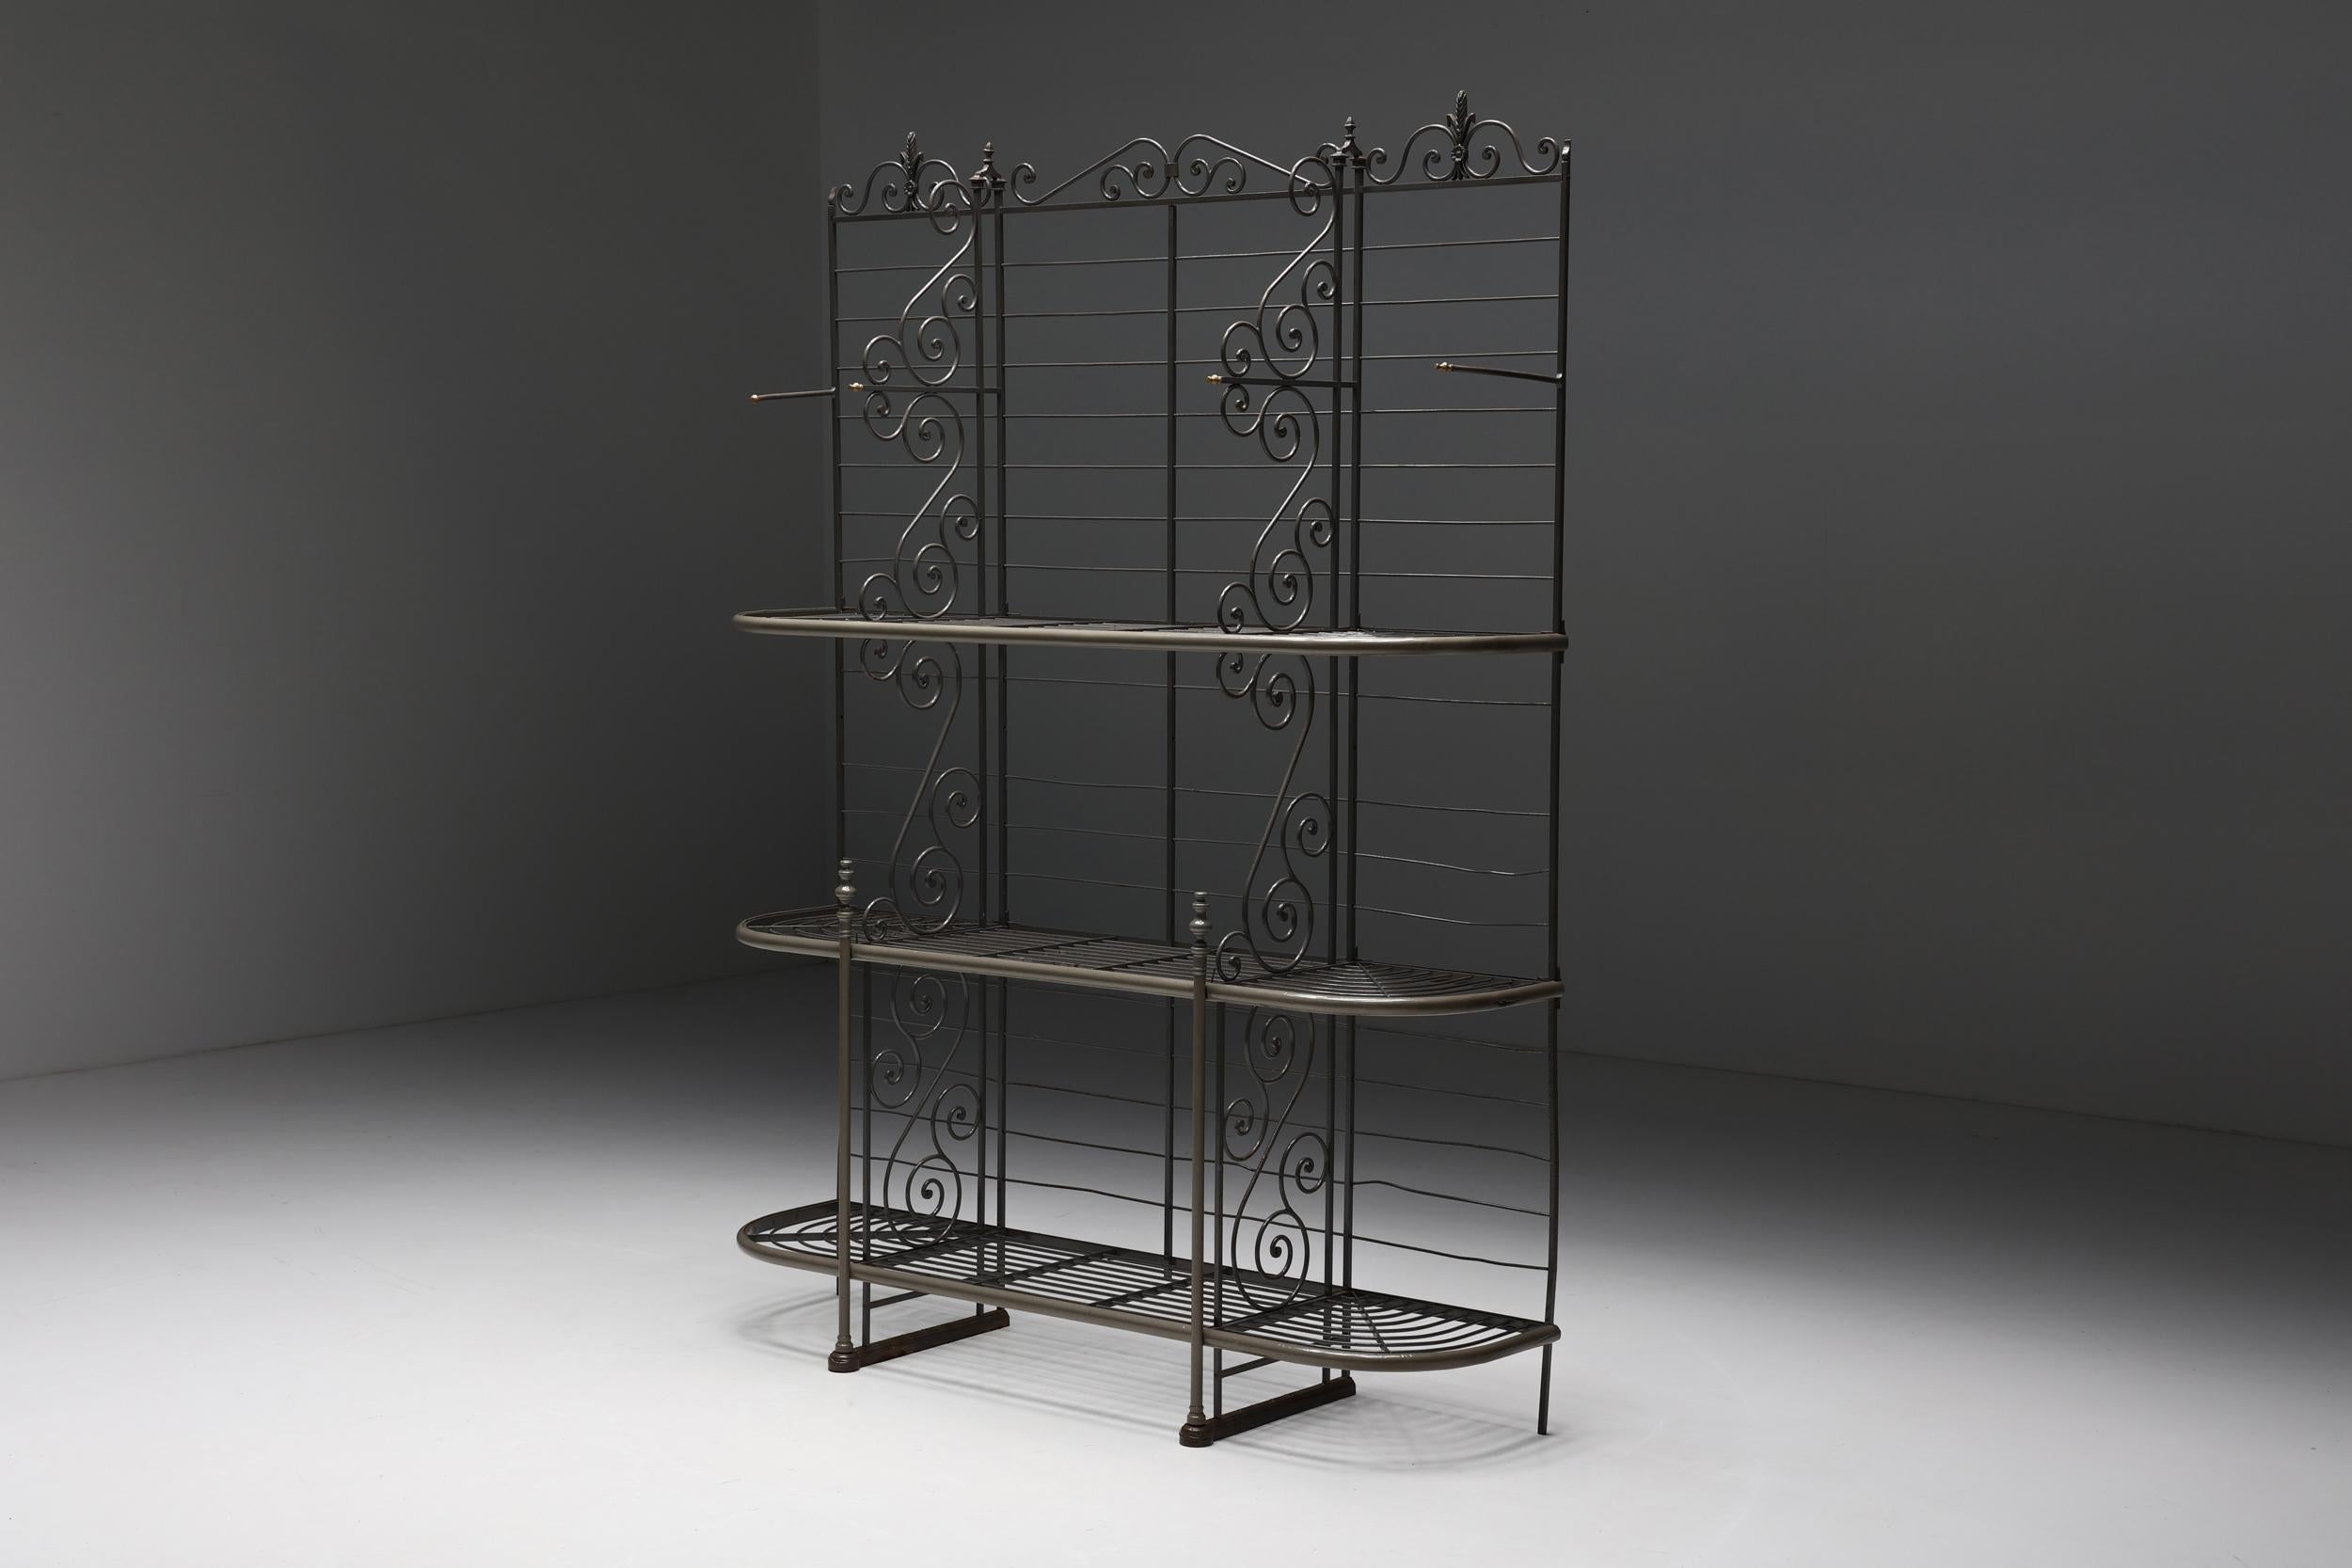 Antique bakery rack; wrought iron; 1920s; shelves; storing; storage unit; bakers shelving; 

Antique bakery rack in wrought iron, dating back to the 1920s. Sculptural storage unit, characterized by its curly detailing. This piece consists of three